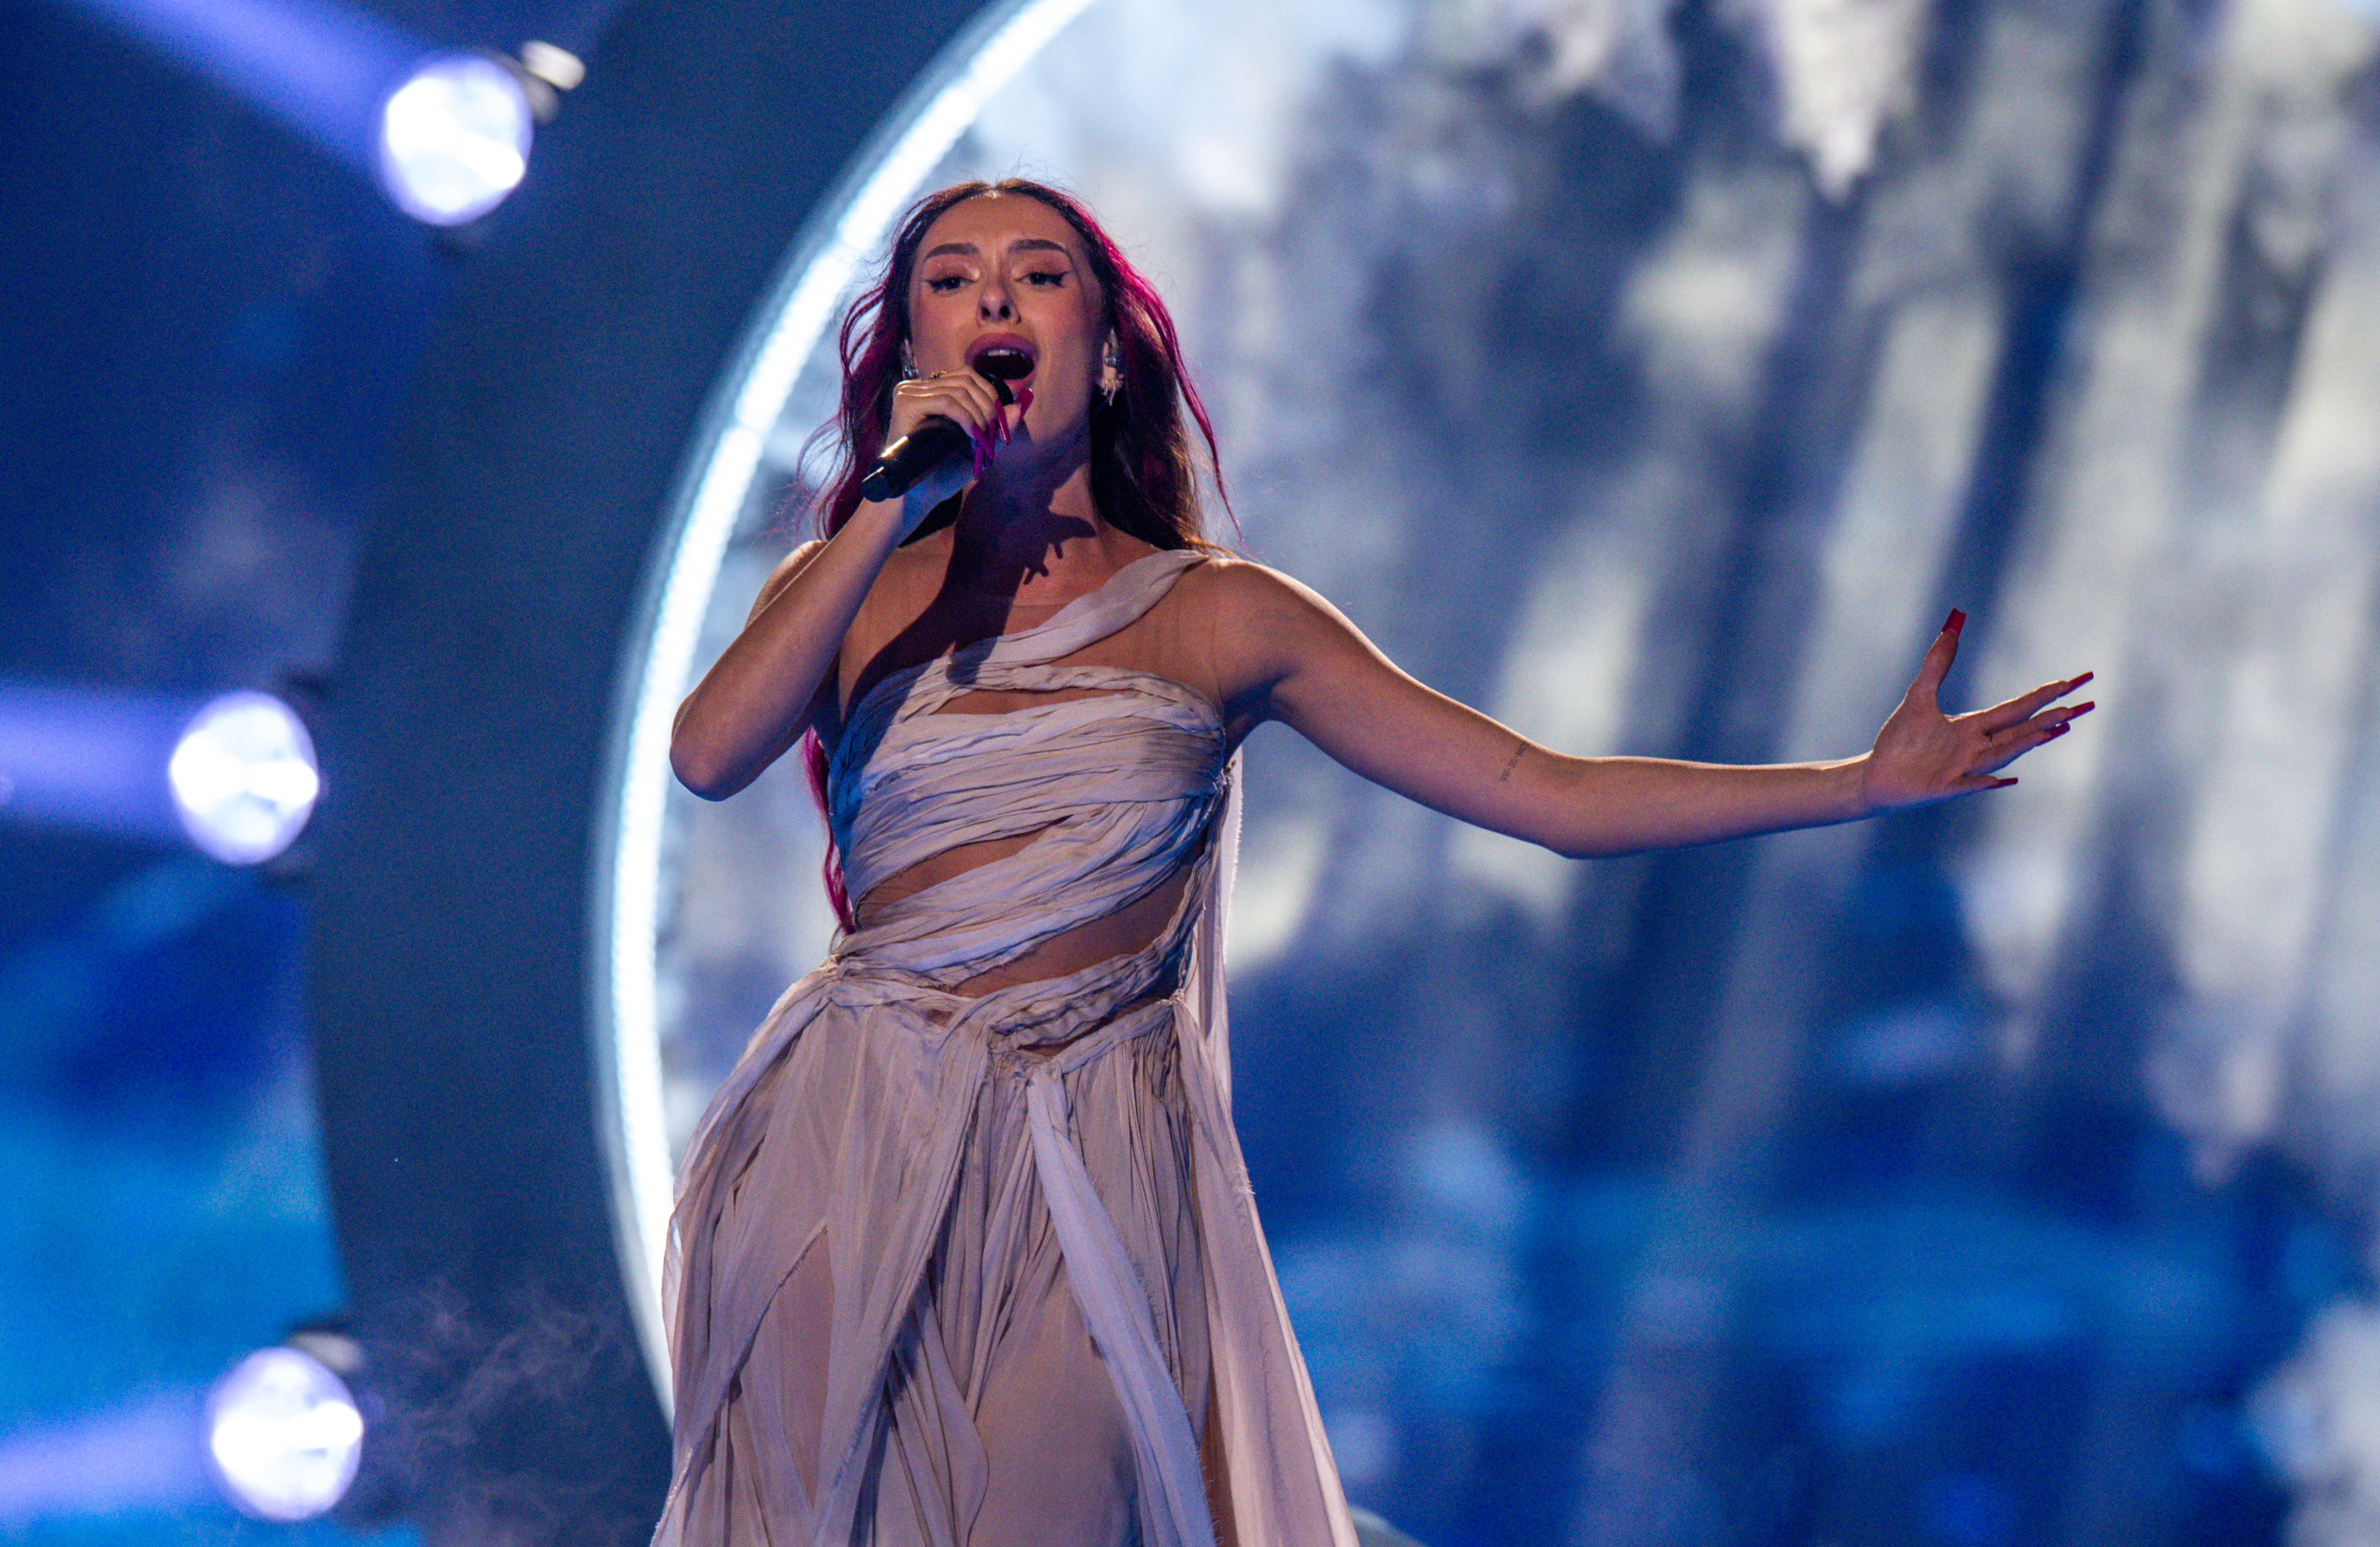 Eurovision star demands video with Israel's Eden Golan is deleted after backlash